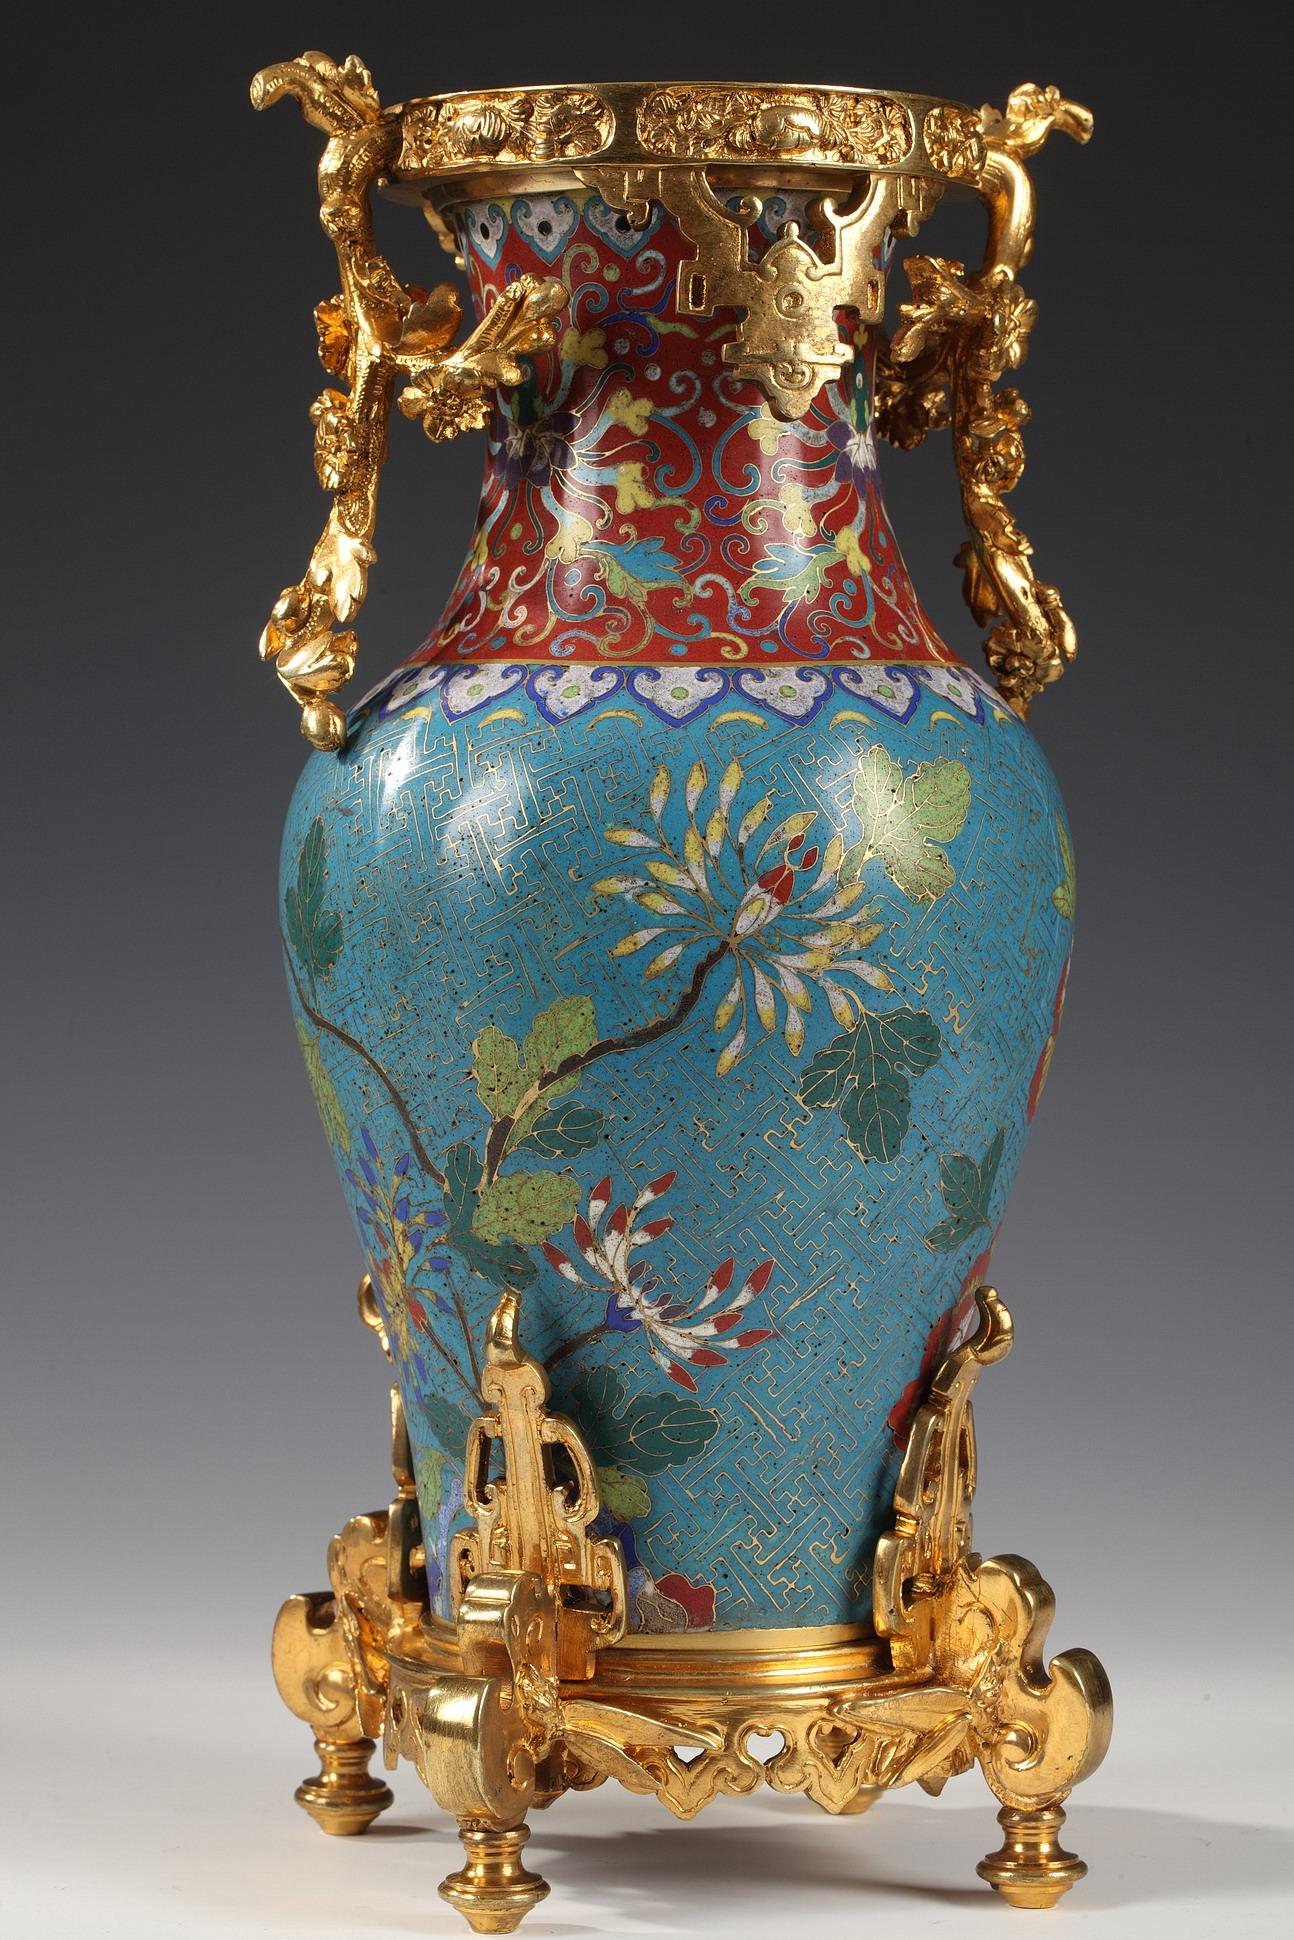 French Pair of Chinese Cloisonné Enamel Vases Attributed to L'Escalier de Cristal